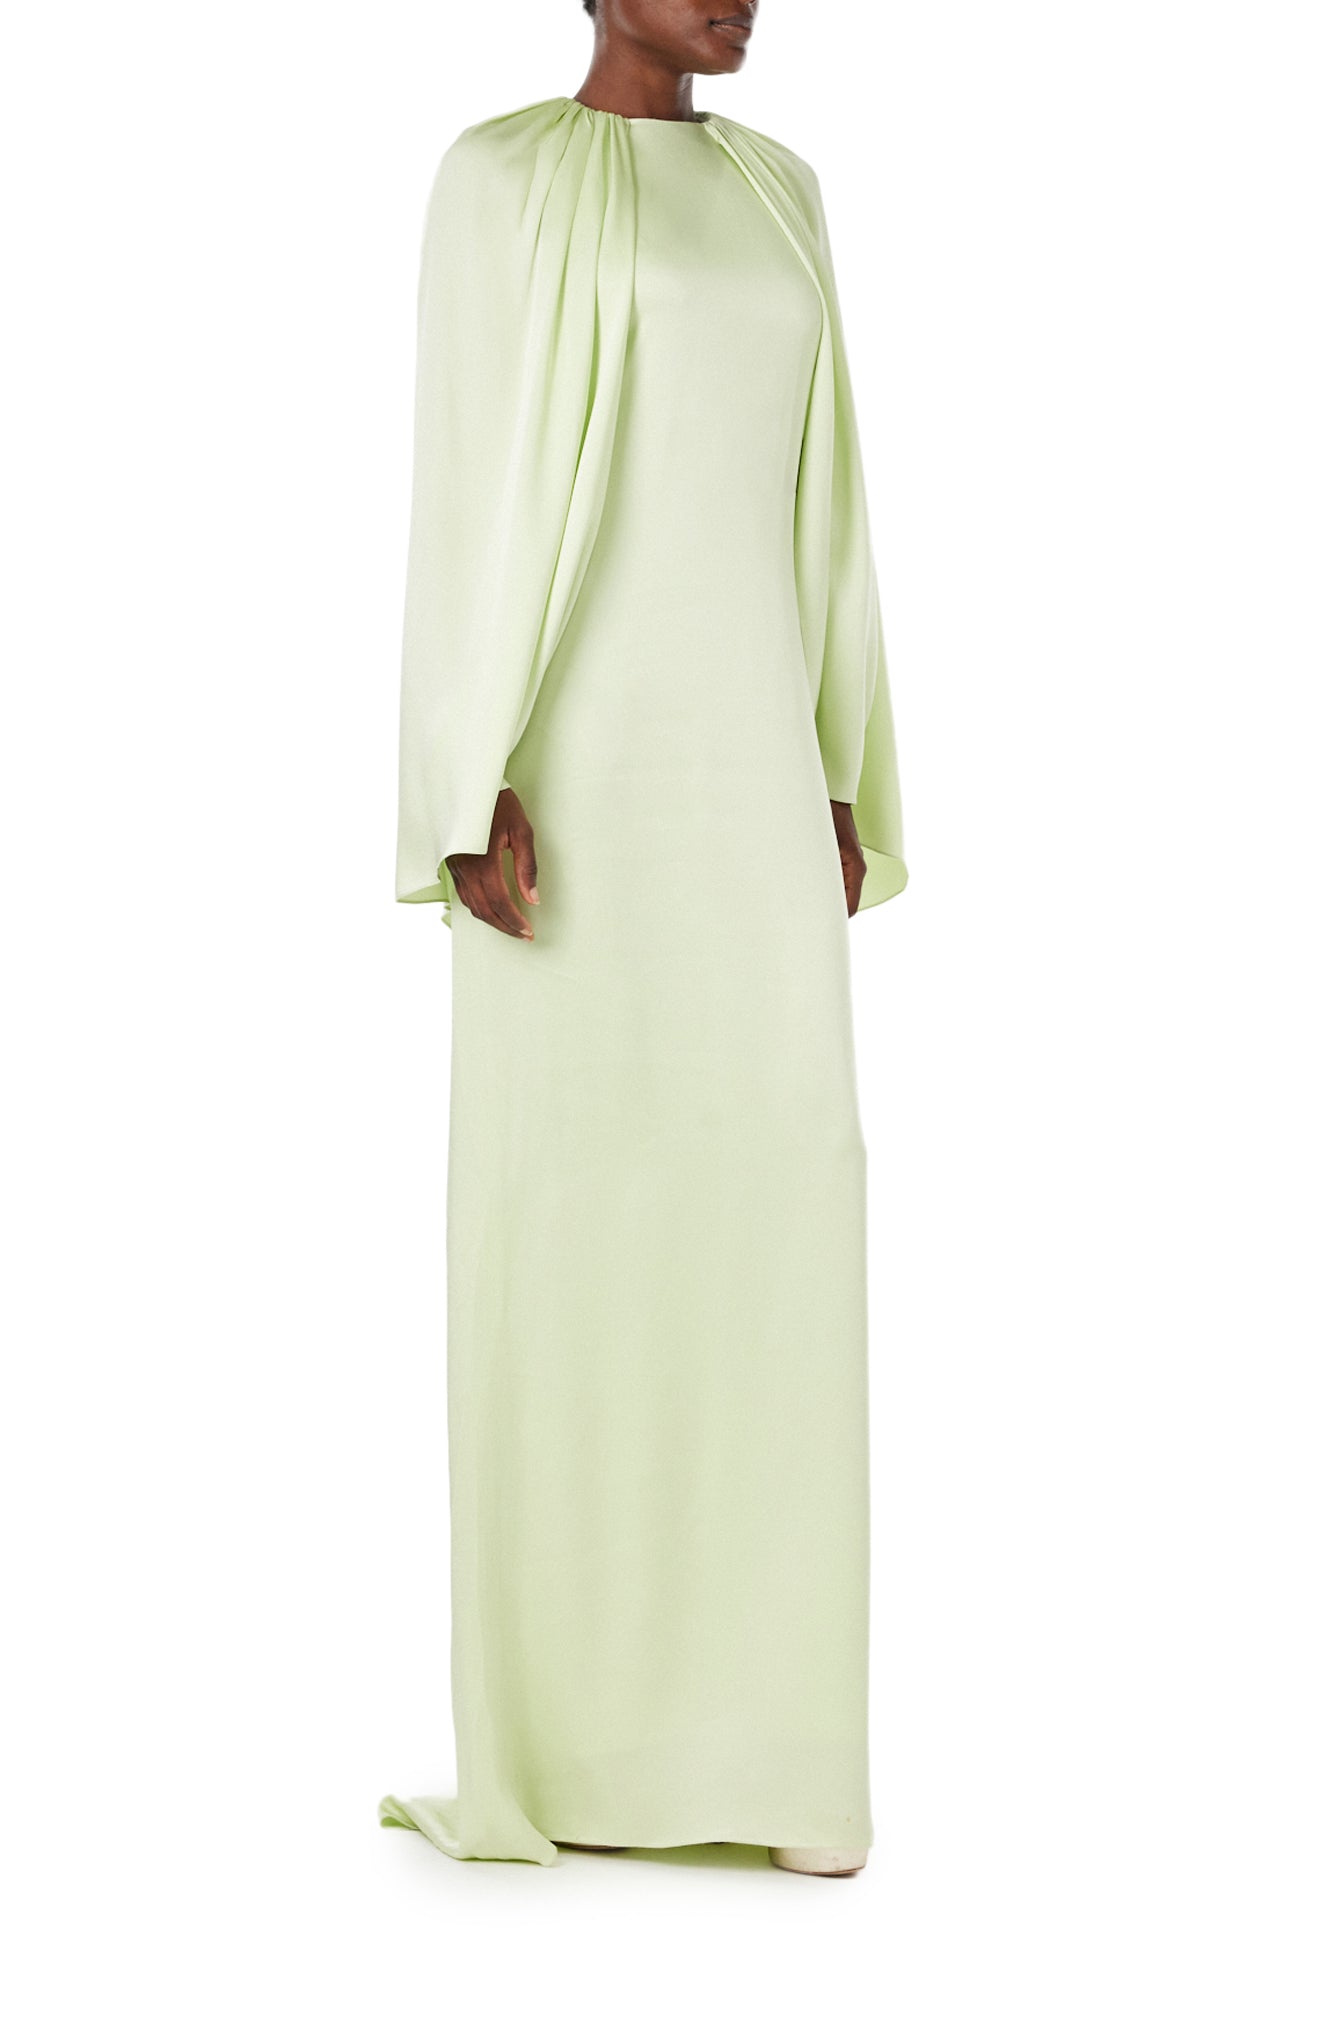 Monique Lhuillier Spring 2024 floor length capelet gown with jewel neckline in honeydew colored crepe back satin - right side.